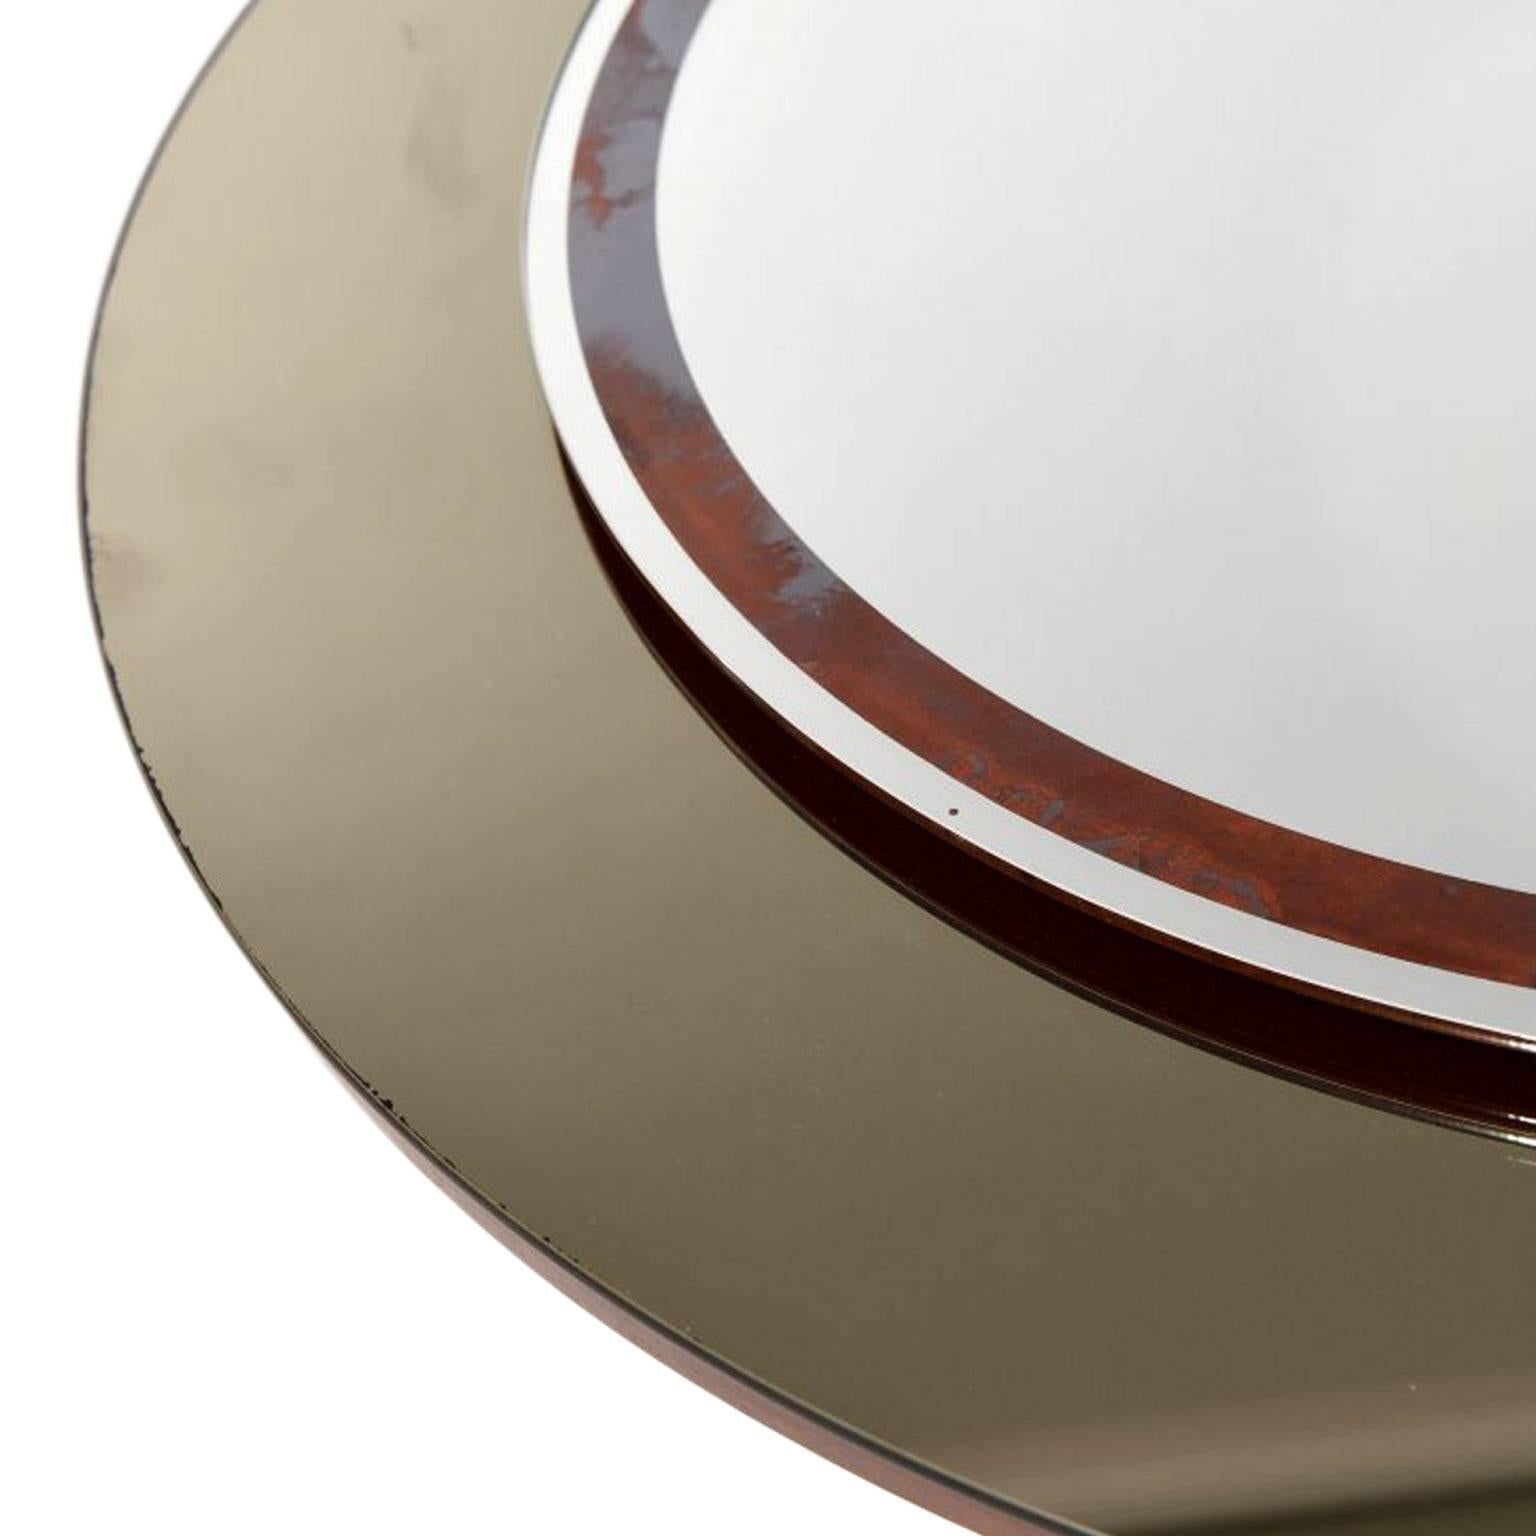 Elegant circular mirror with smoked glass rim. Layered on top is a contrast circular piece of plain mirror with a rust colored band. These pieces are mounted on to a board with a hook at the back for hanging the mirror to the wall. 

This cool and